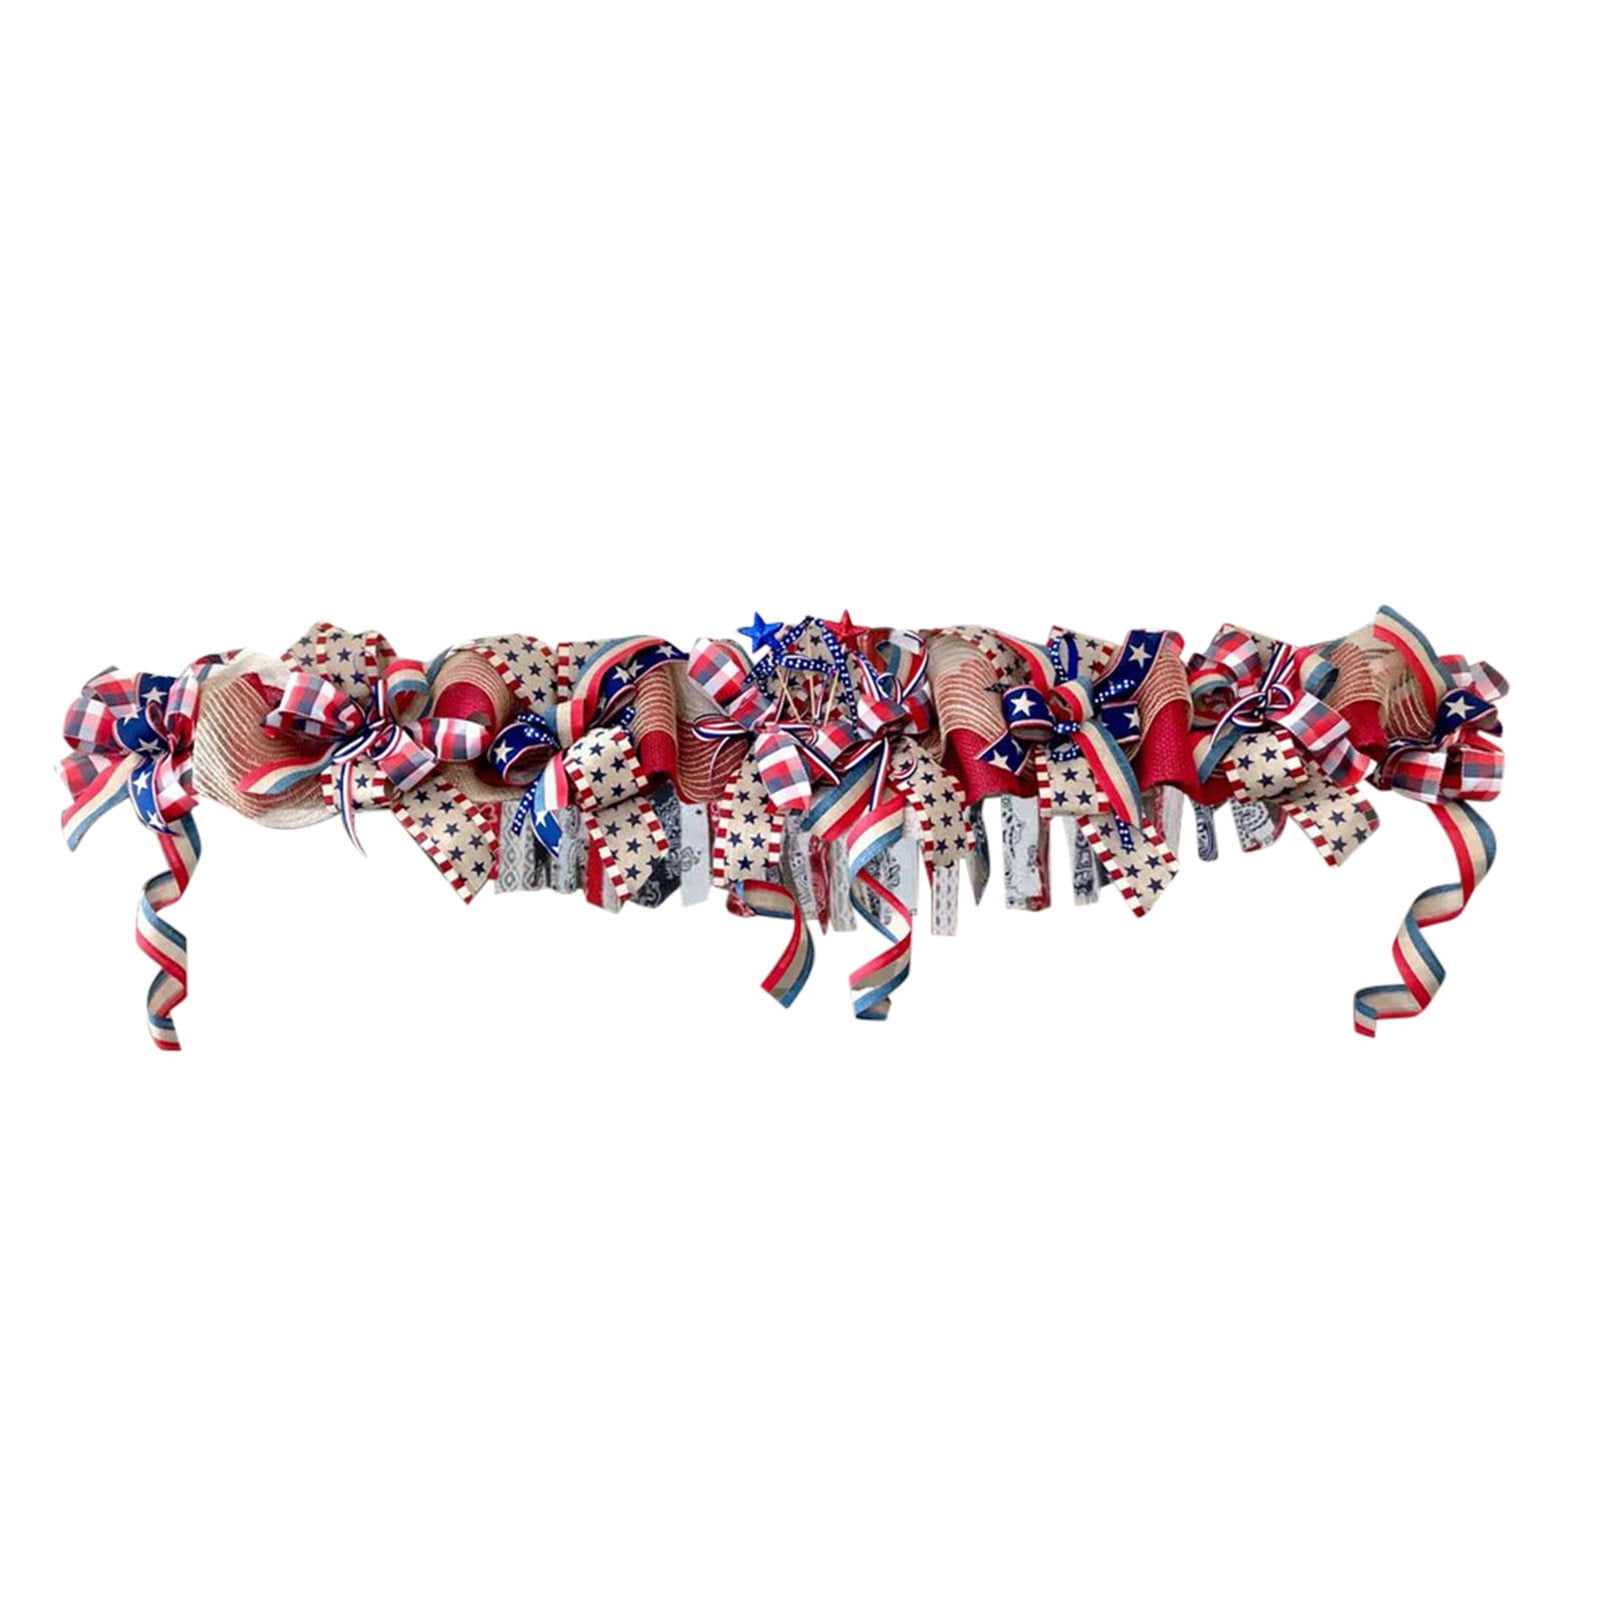 4TH OF JULY GARLAND PATRIOTIC 9FT GARLAND 2 STYLES TO CHOOSE 